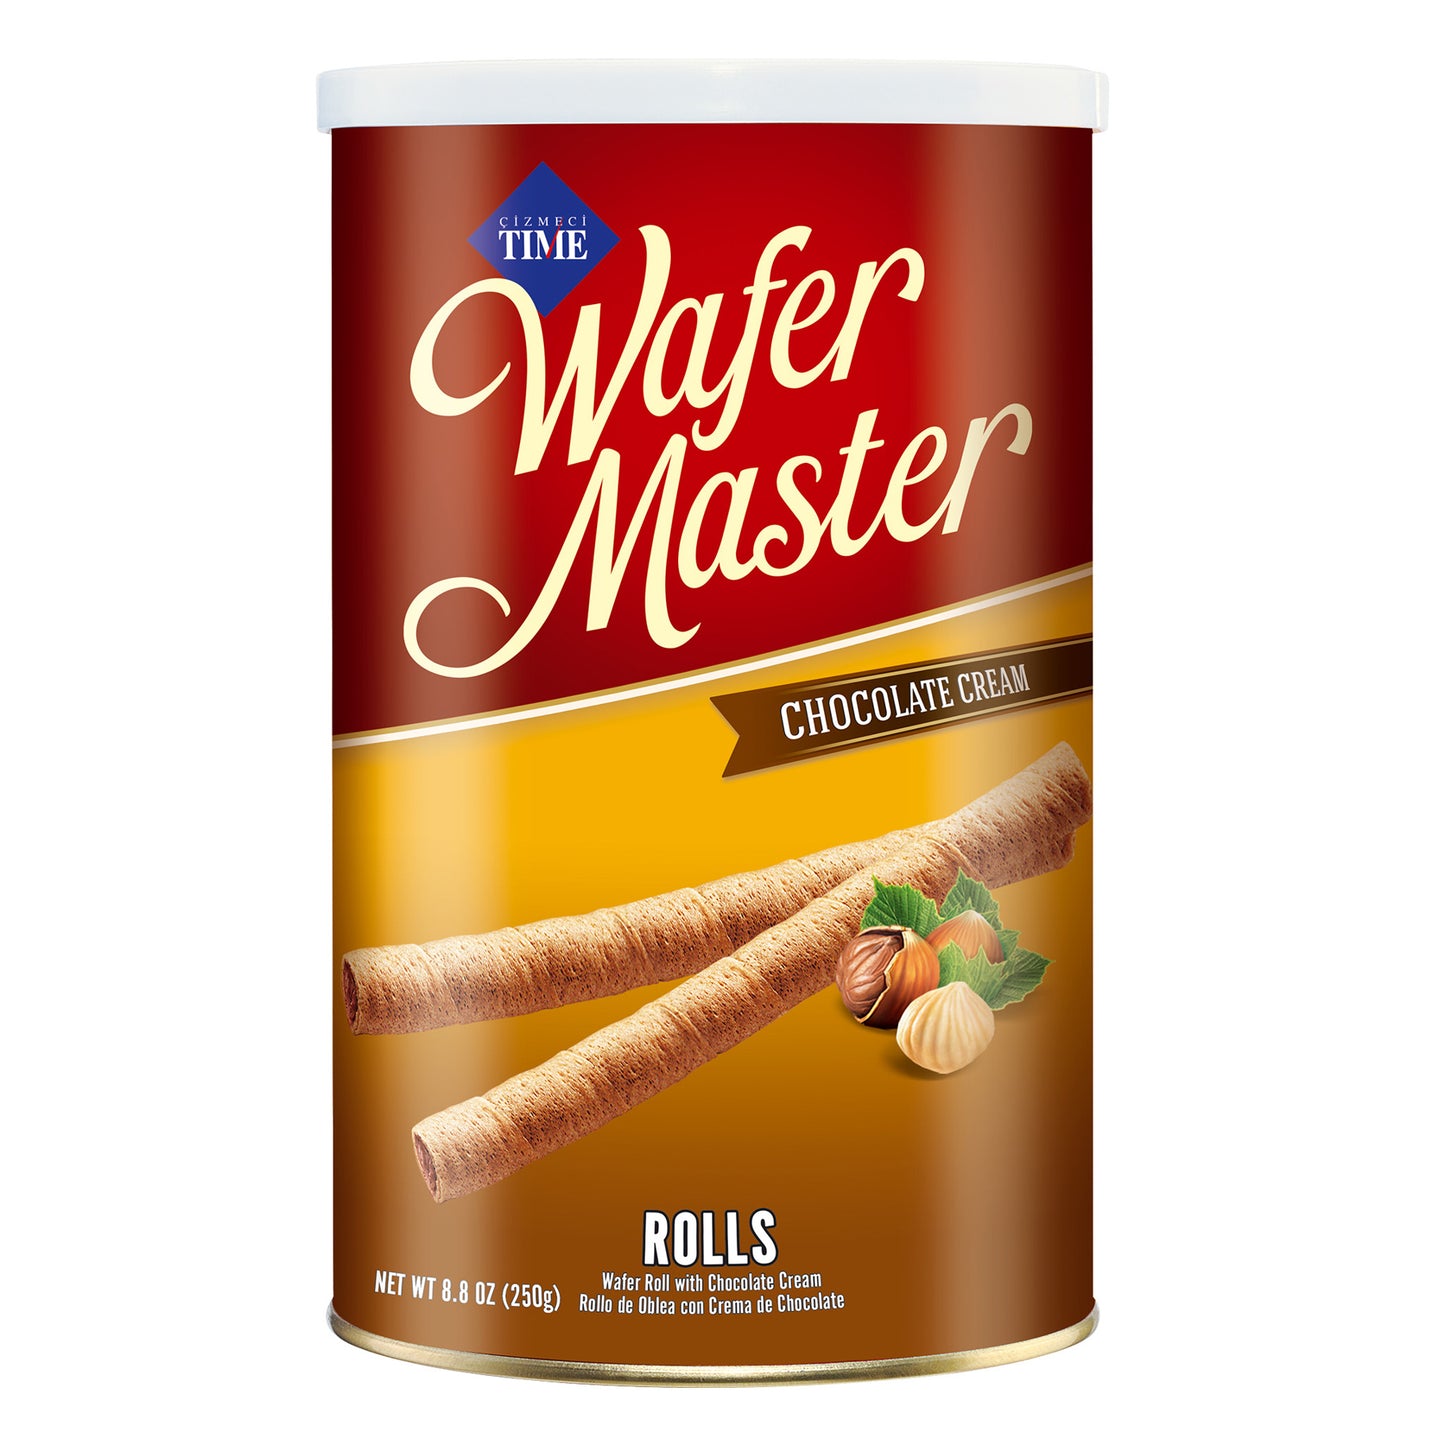 Wafer Master Chocolate Roll 400g